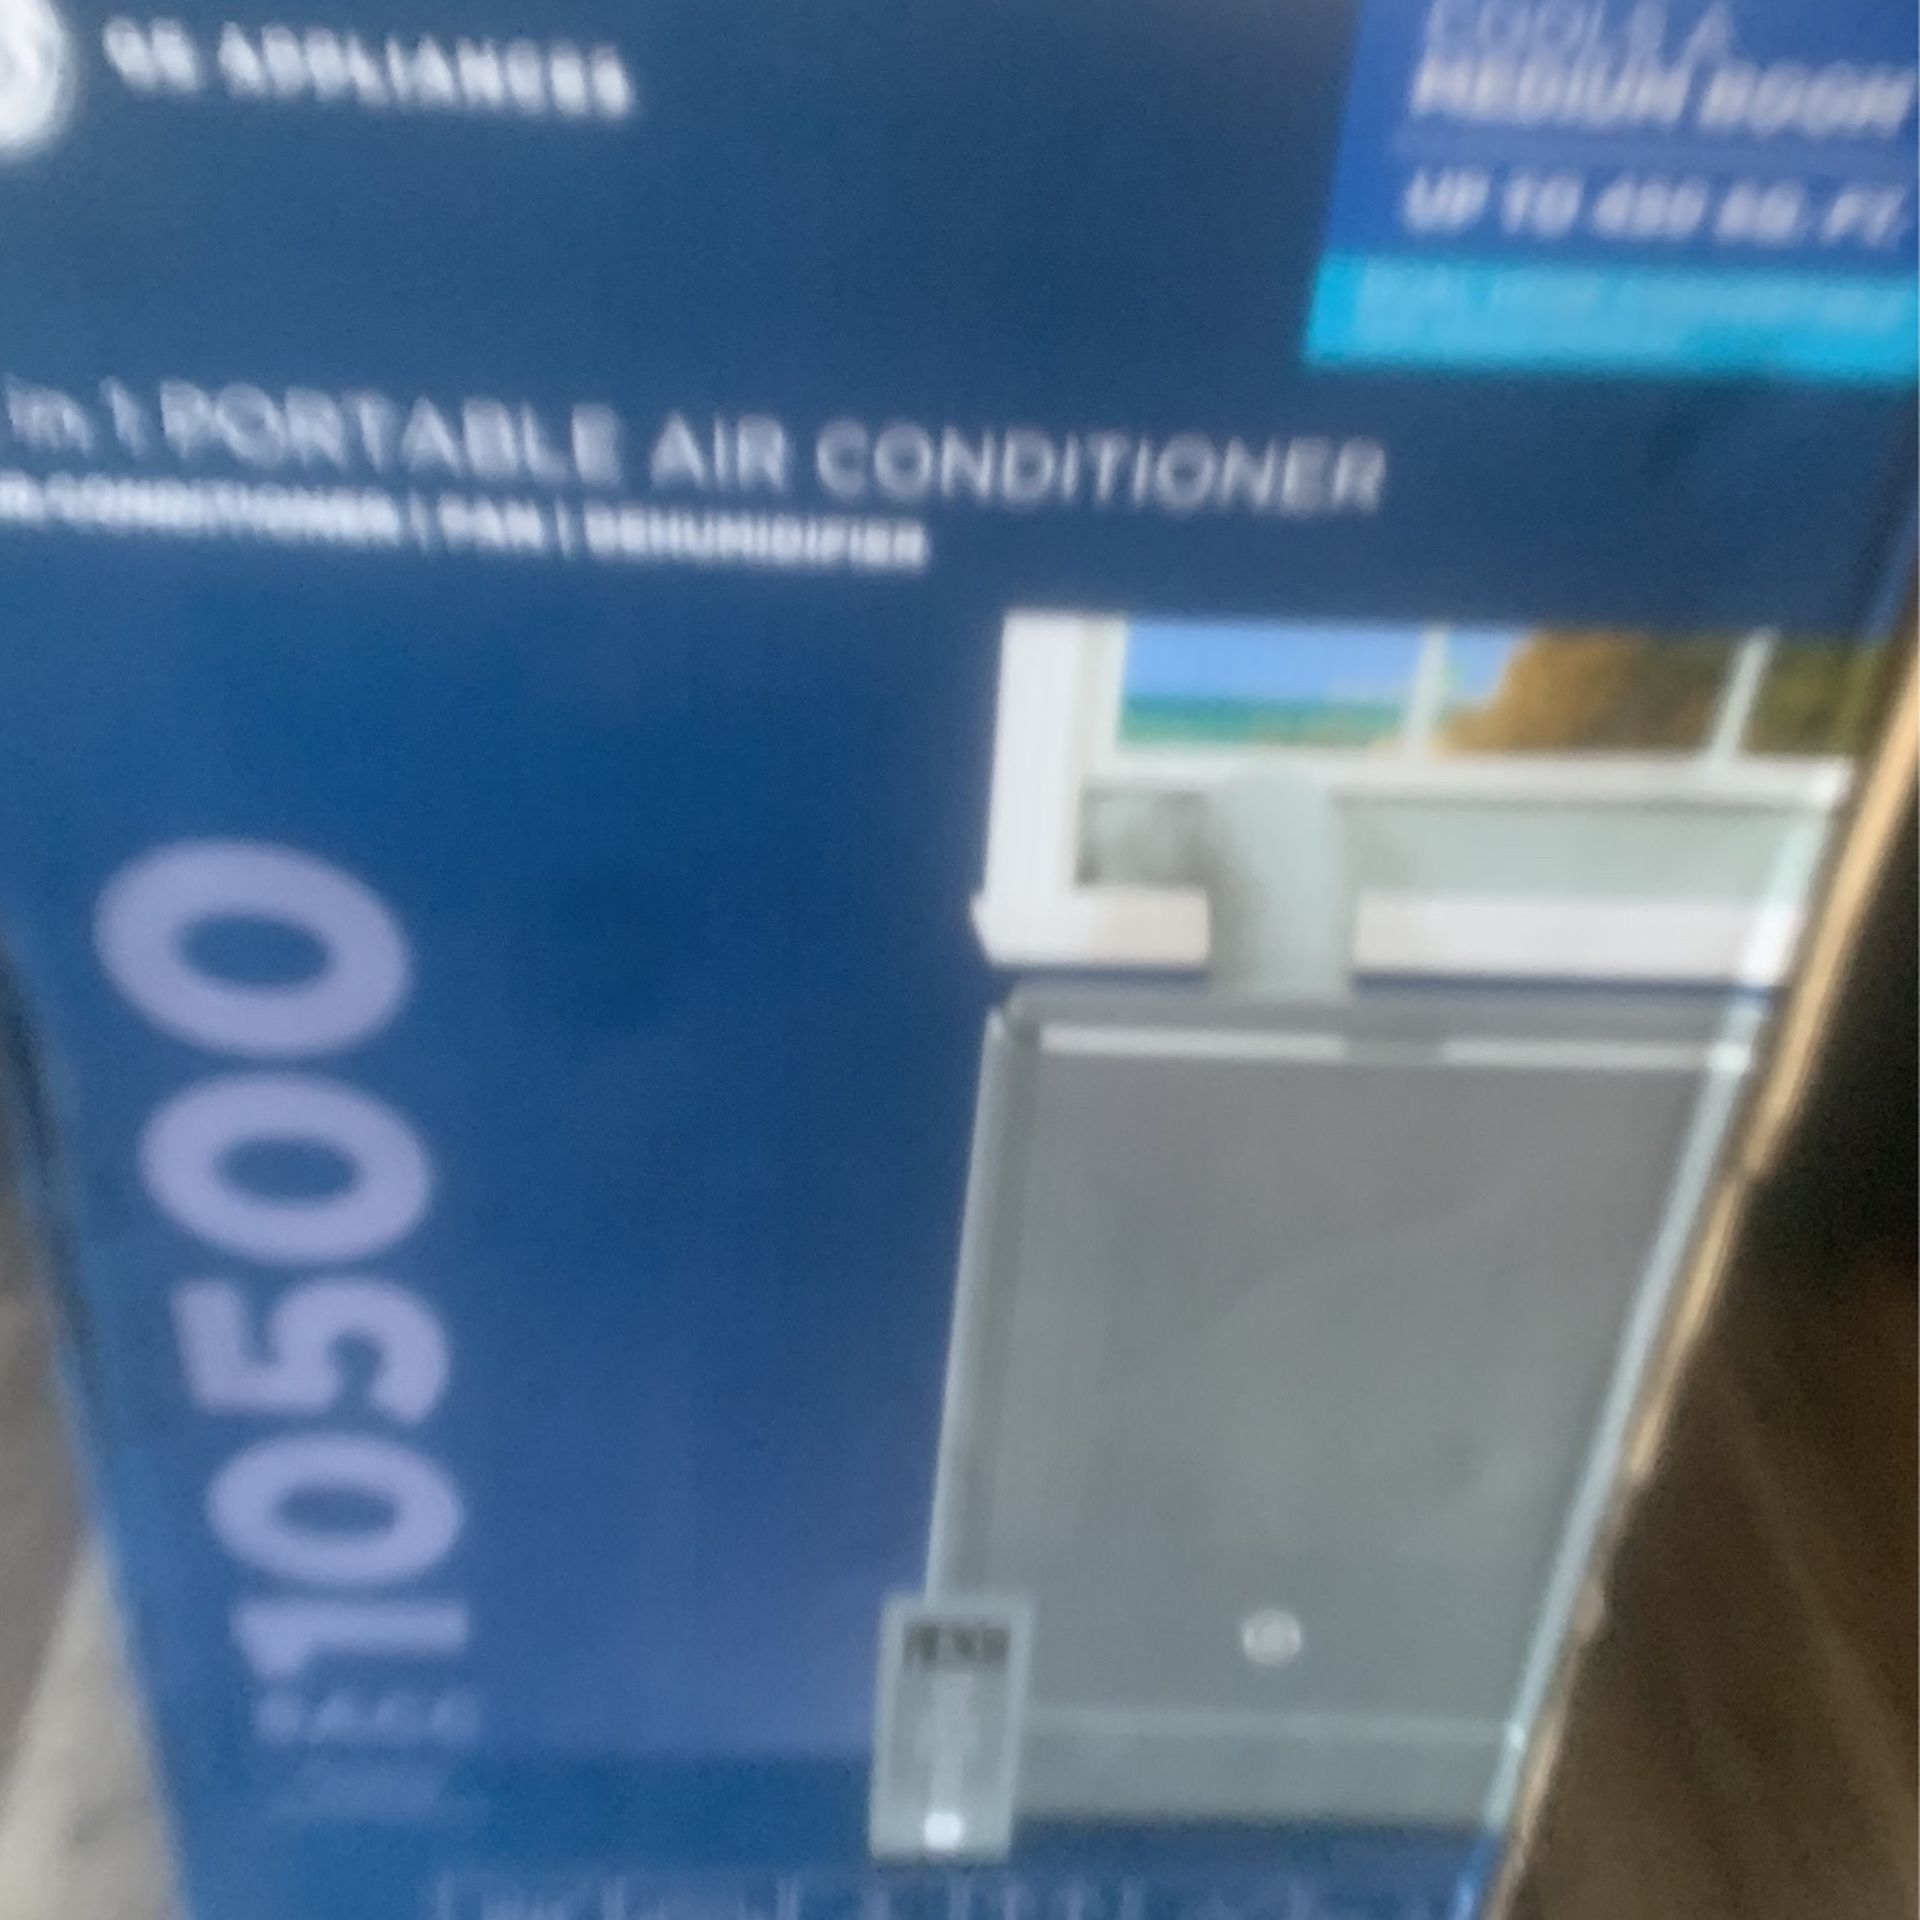 3 In One and one portable air conditioner brand new